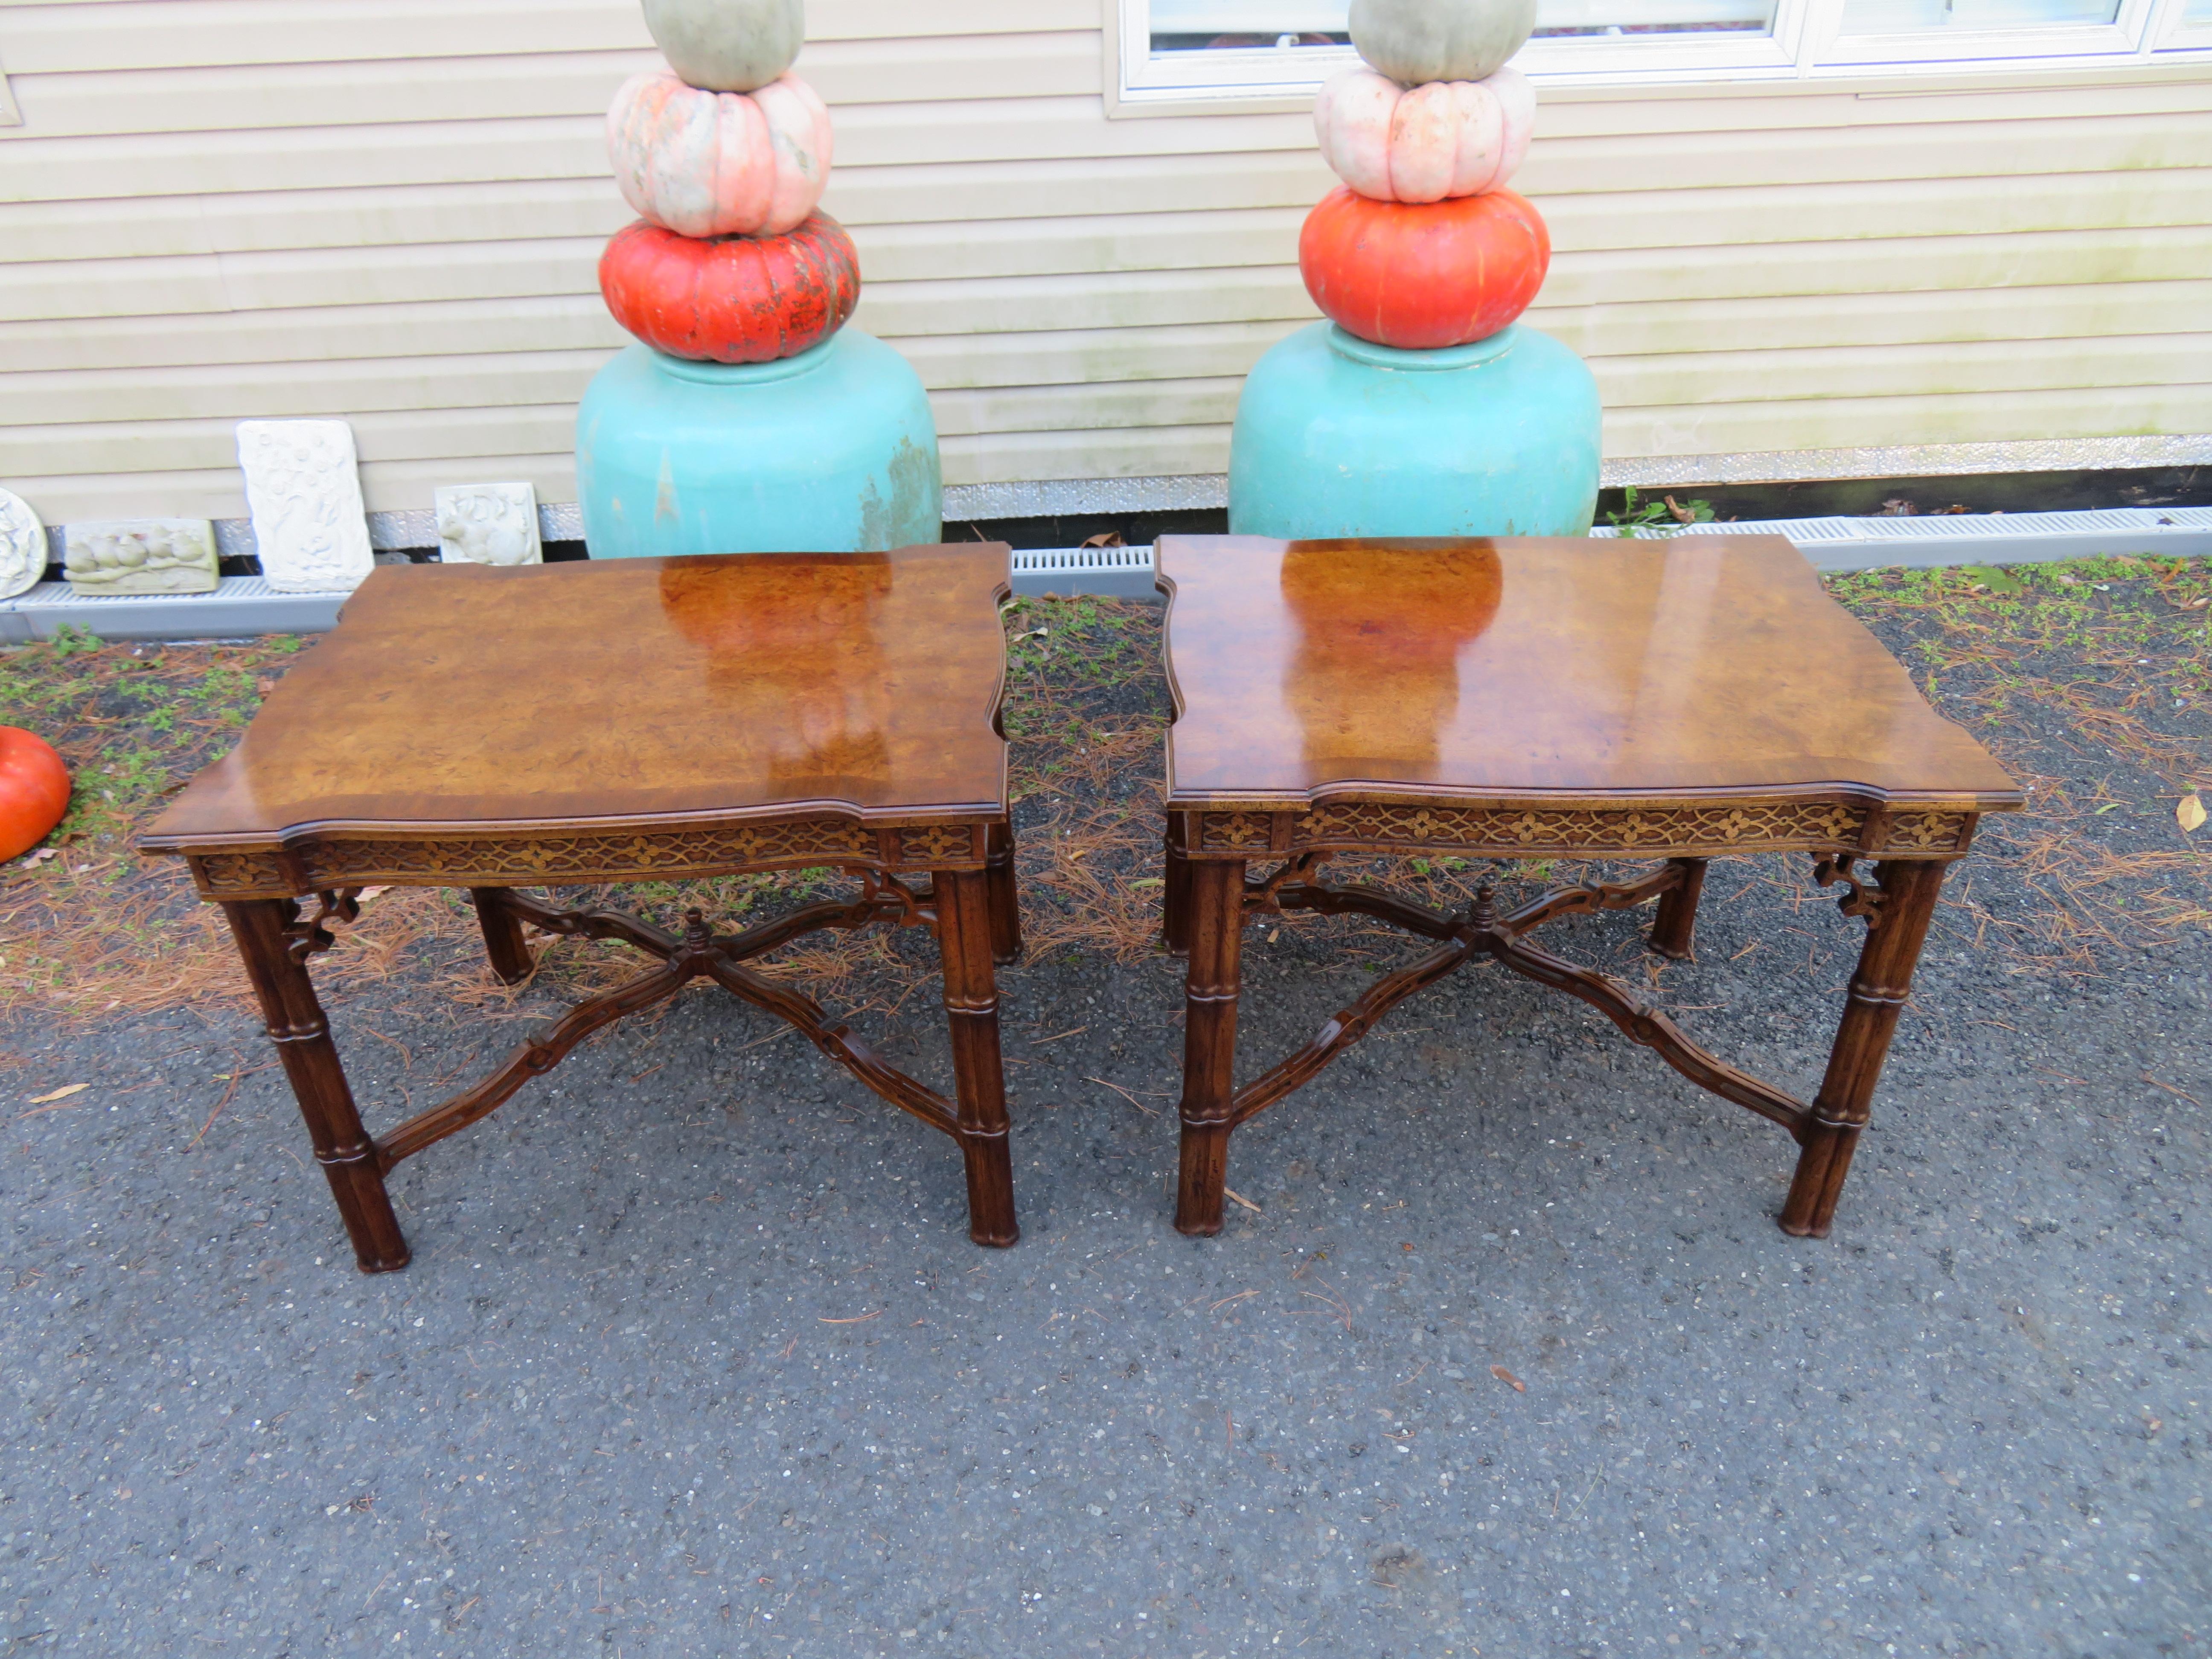 Magnificent pair of burl top Chinoiserie faux bamboo end tables. These tables are in wonderful vintage condition with only light signs of age. They measure 25